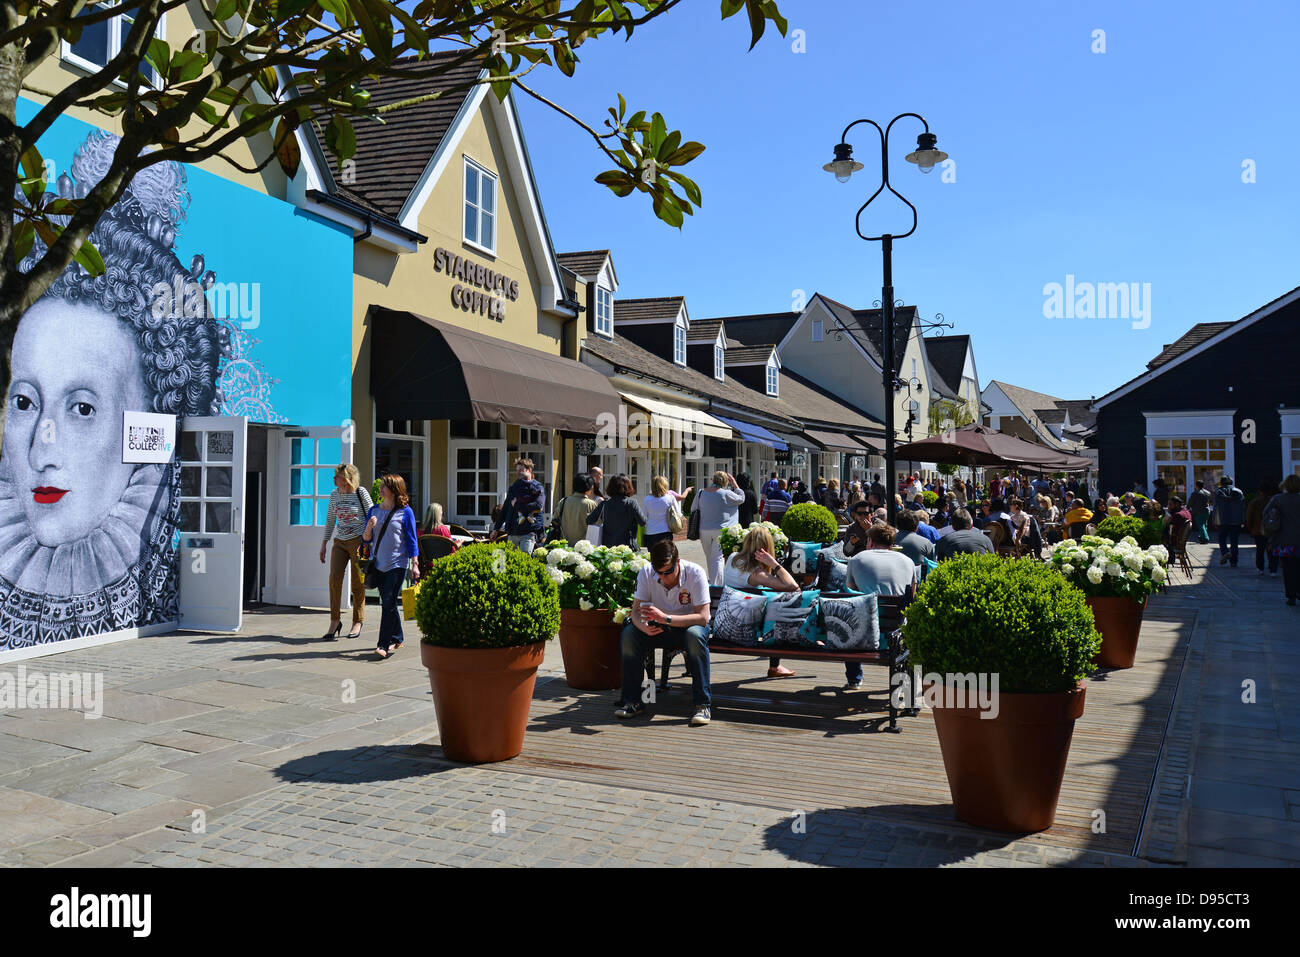 Starbucks Coffee shop, Bicester Village Outlet Shopping Centre, Bicester, Oxfordshire, England, United Kingdom Stock Photo